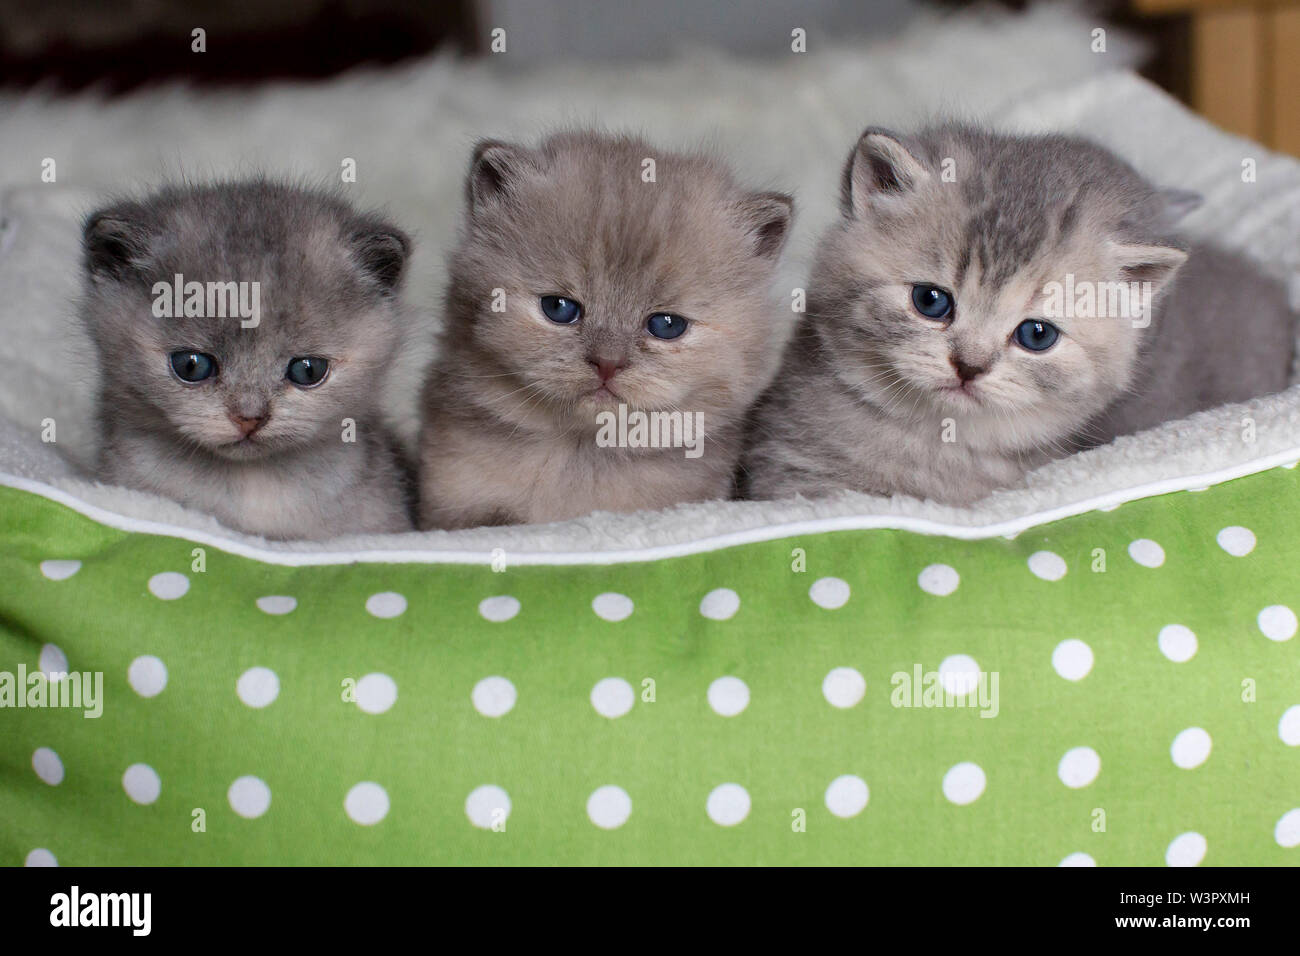 British Shorthair Cat. Three kittens (4 weeks old) in a pet bed. Germany Stock Photo